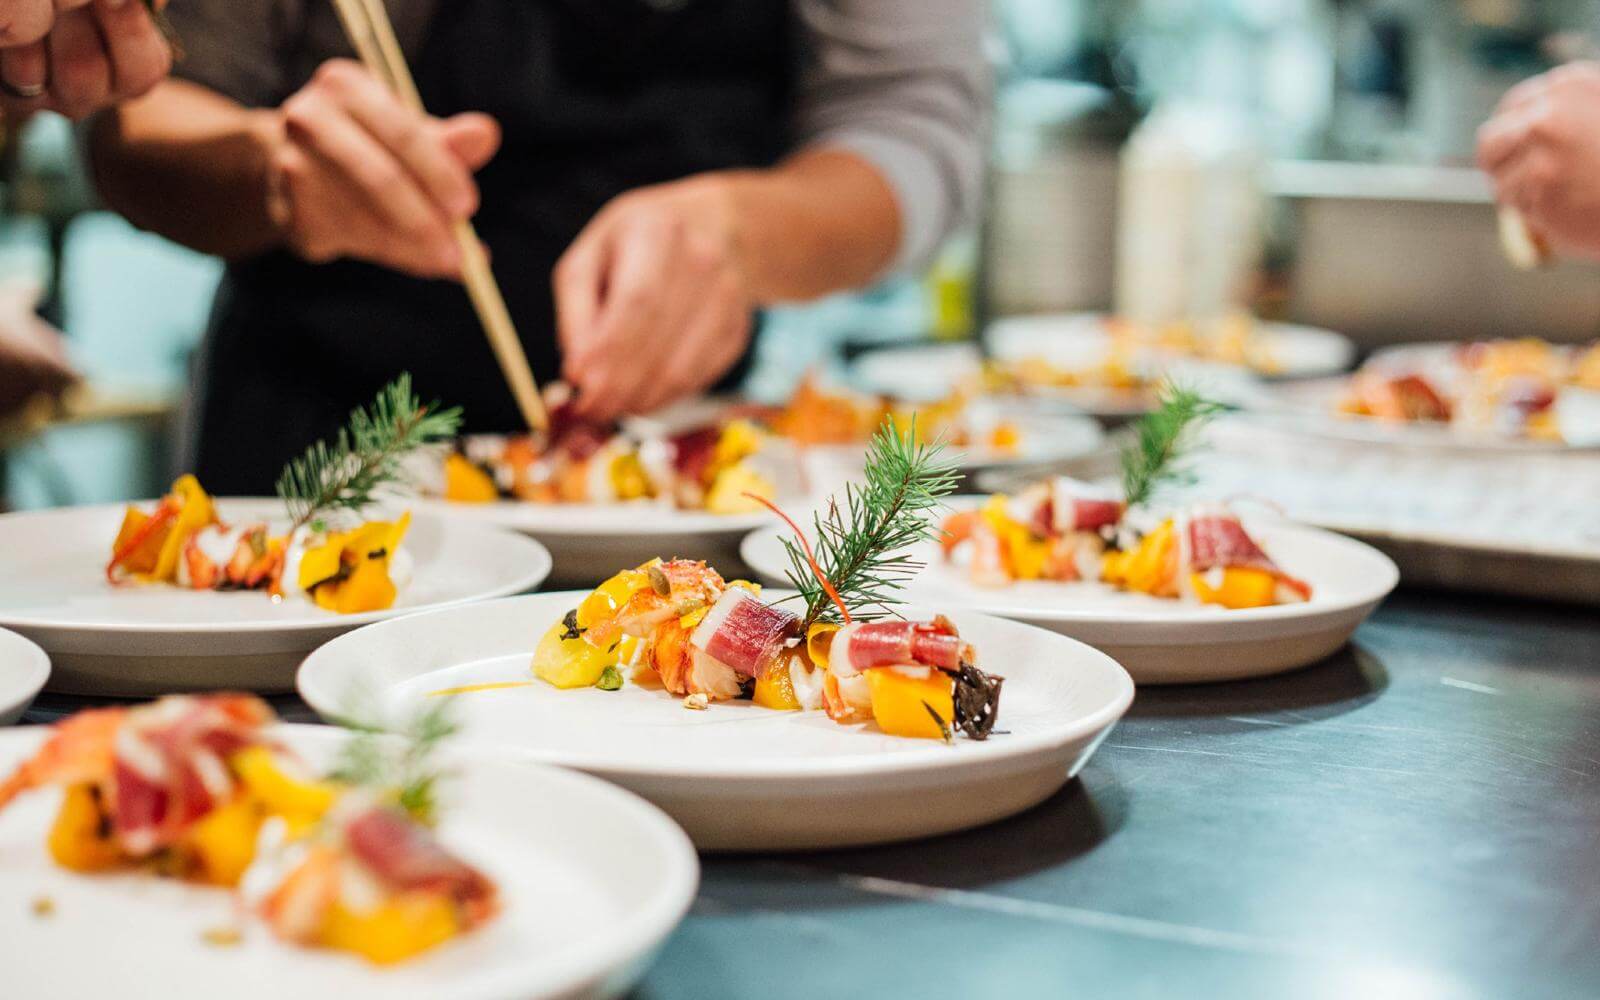 a chef preparing a starter during dine out vancouver bc canada